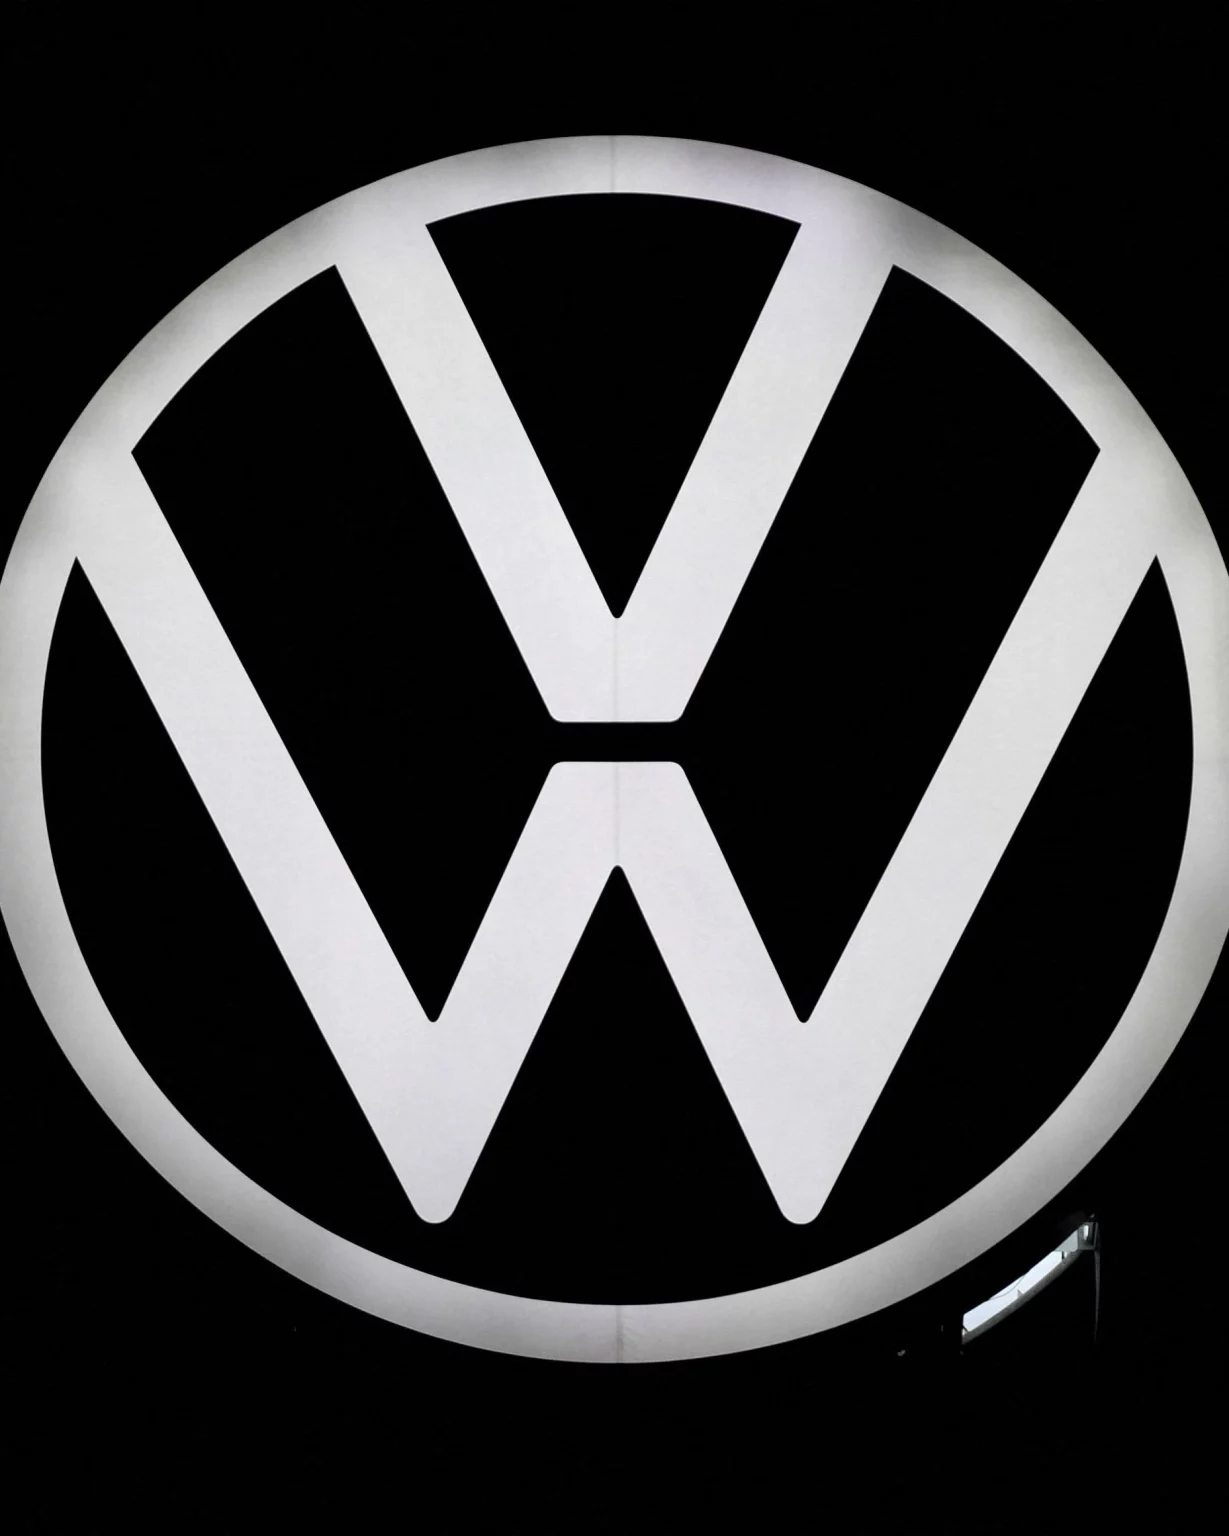 Inside Volkswagen’s $30B Plan To Boost Its Software Efforts, To Compete With Tesla, Hampered By Internal Battles, Technical Glitches, And A Complex Structure (Christoph Rauwald/Bloomberg)